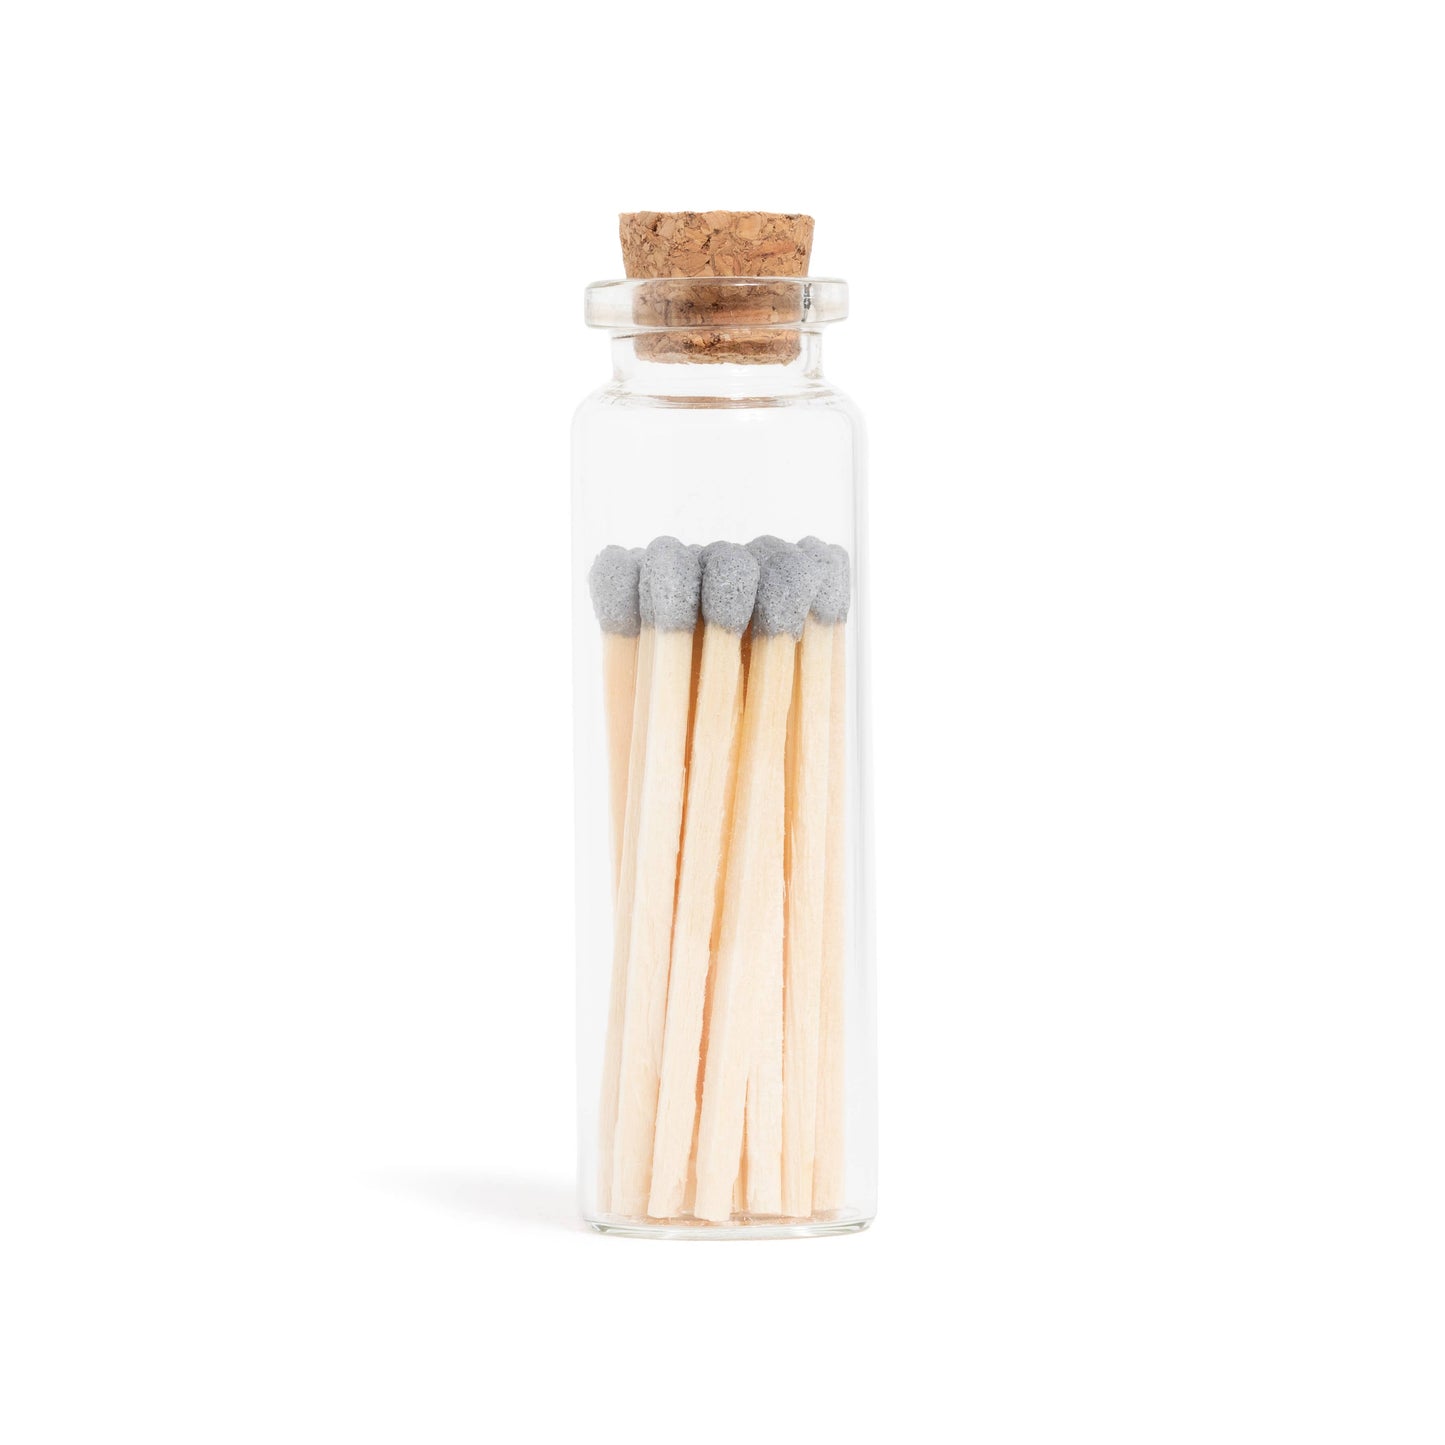 Grey Matches in Small Corked Vial